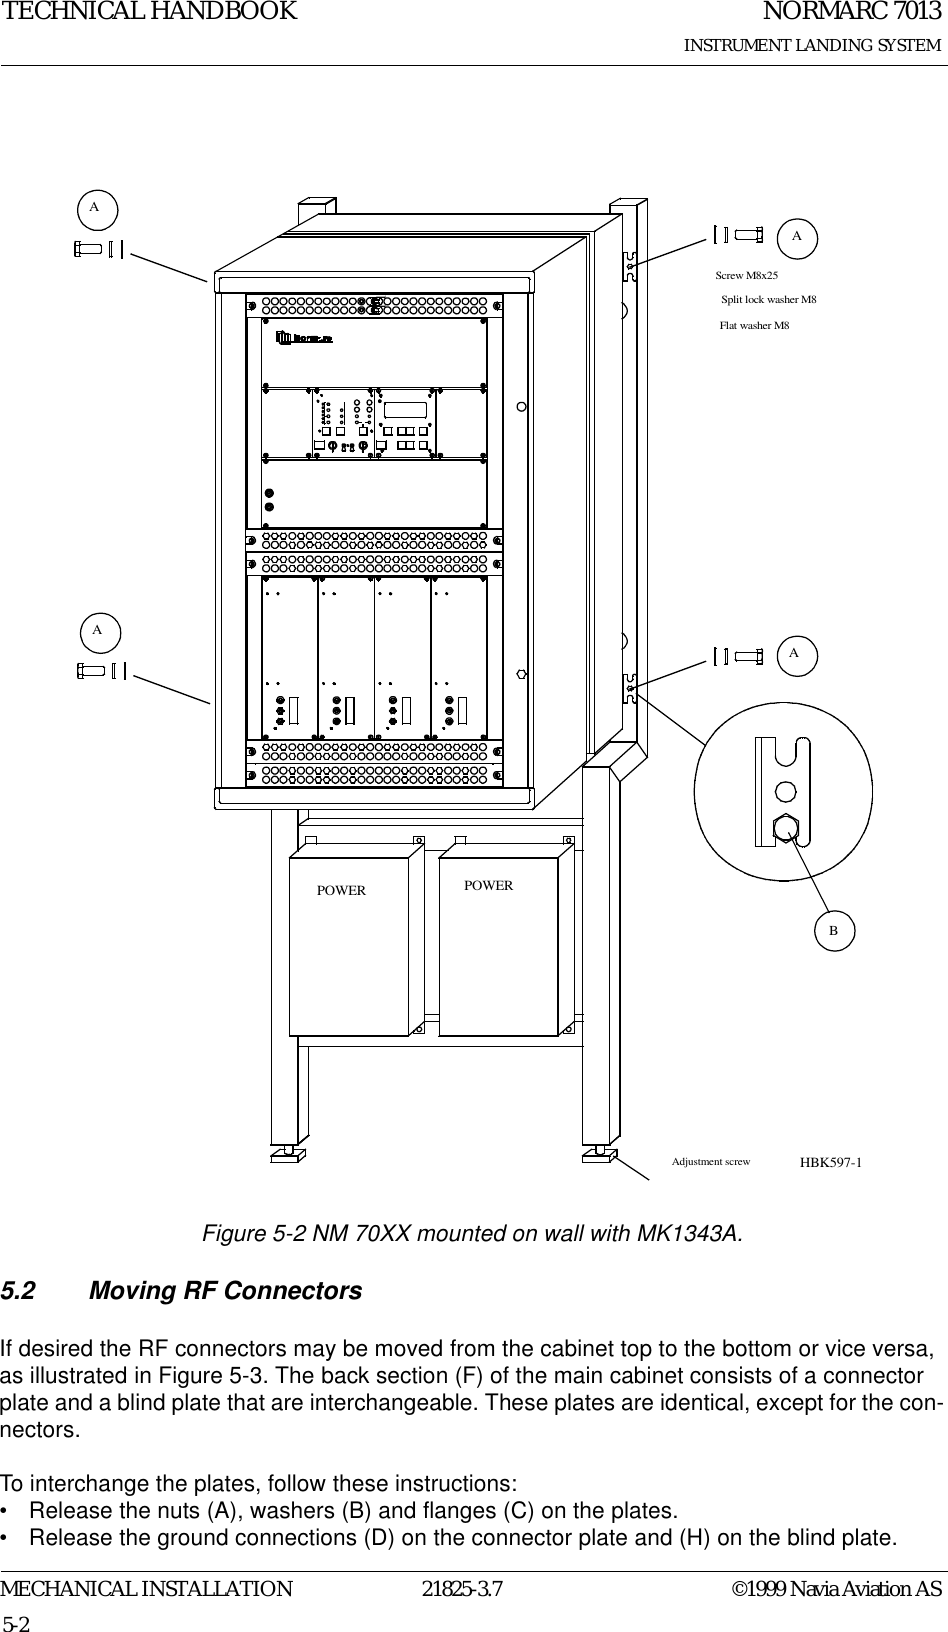 NORMARC 7013INSTRUMENT LANDING SYSTEMTECHNICAL HANDBOOKMECHANICAL INSTALLATION 21825-3.7 ©1999 Navia Aviation AS5-2Figure 5-2 NM 70XX mounted on wall with MK1343A.5.2 Moving RF ConnectorsIf desired the RF connectors may be moved from the cabinet top to the bottom or vice versa, as illustrated in Figure 5-3. The back section (F) of the main cabinet consists of a connector plate and a blind plate that are interchangeable. These plates are identical, except for the con-nectors. To interchange the plates, follow these instructions:• Release the nuts (A), washers (B) and flanges (C) on the plates.• Release the ground connections (D) on the connector plate and (H) on the blind plate.POWER POWERAdjustment screw11Flat washer M8Split lock washer M8Screw M8x25BAAAAHBK597-1